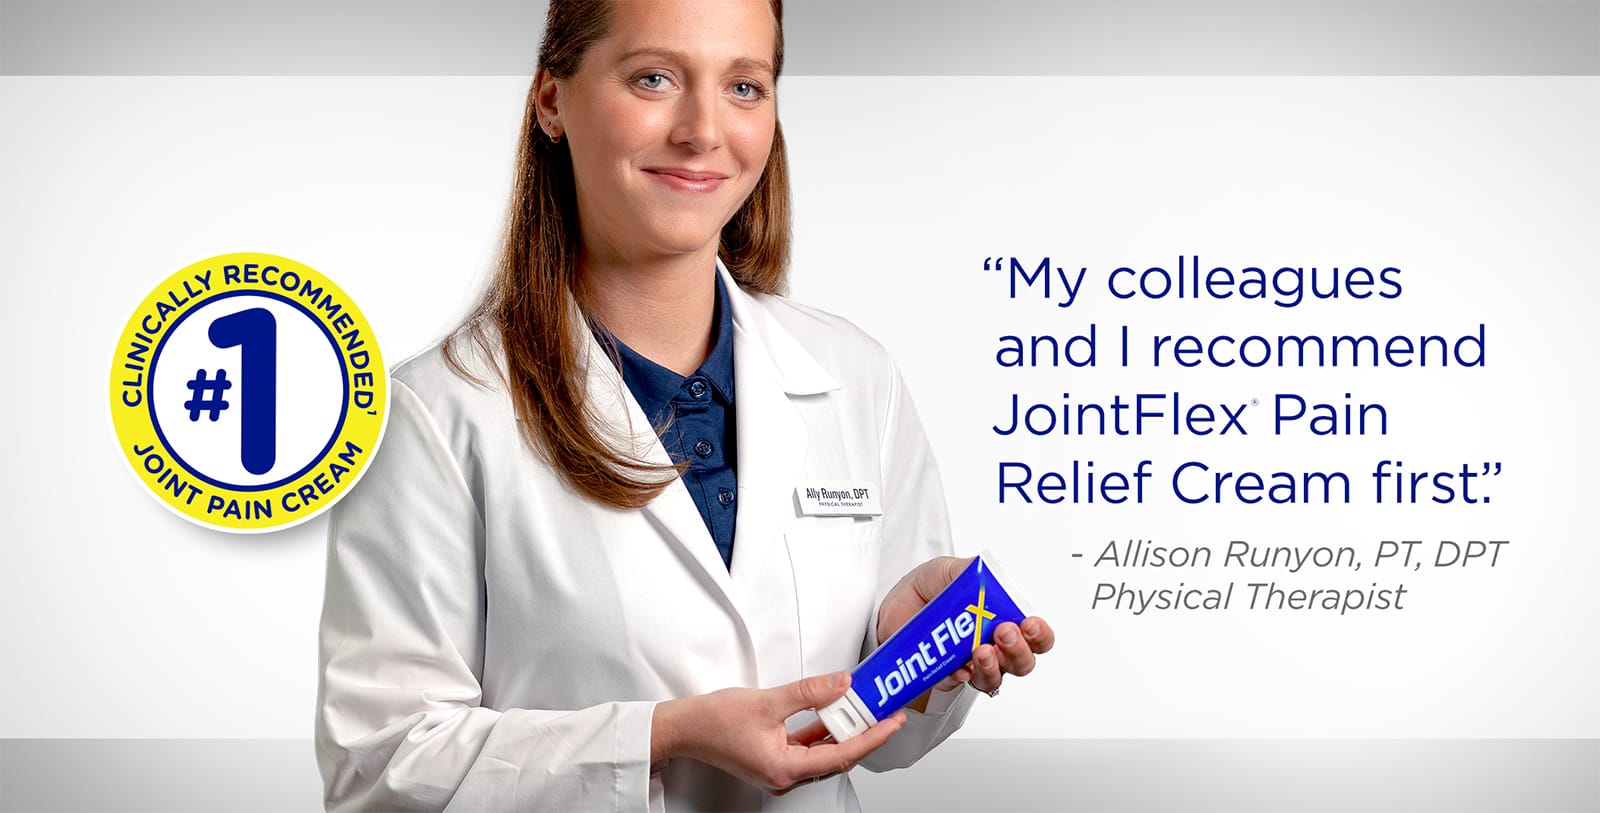 My colleagues and I recommend JointFlex® Pain Relief Cream first. - Allison Runyon, PT, DPT Physical Therapist